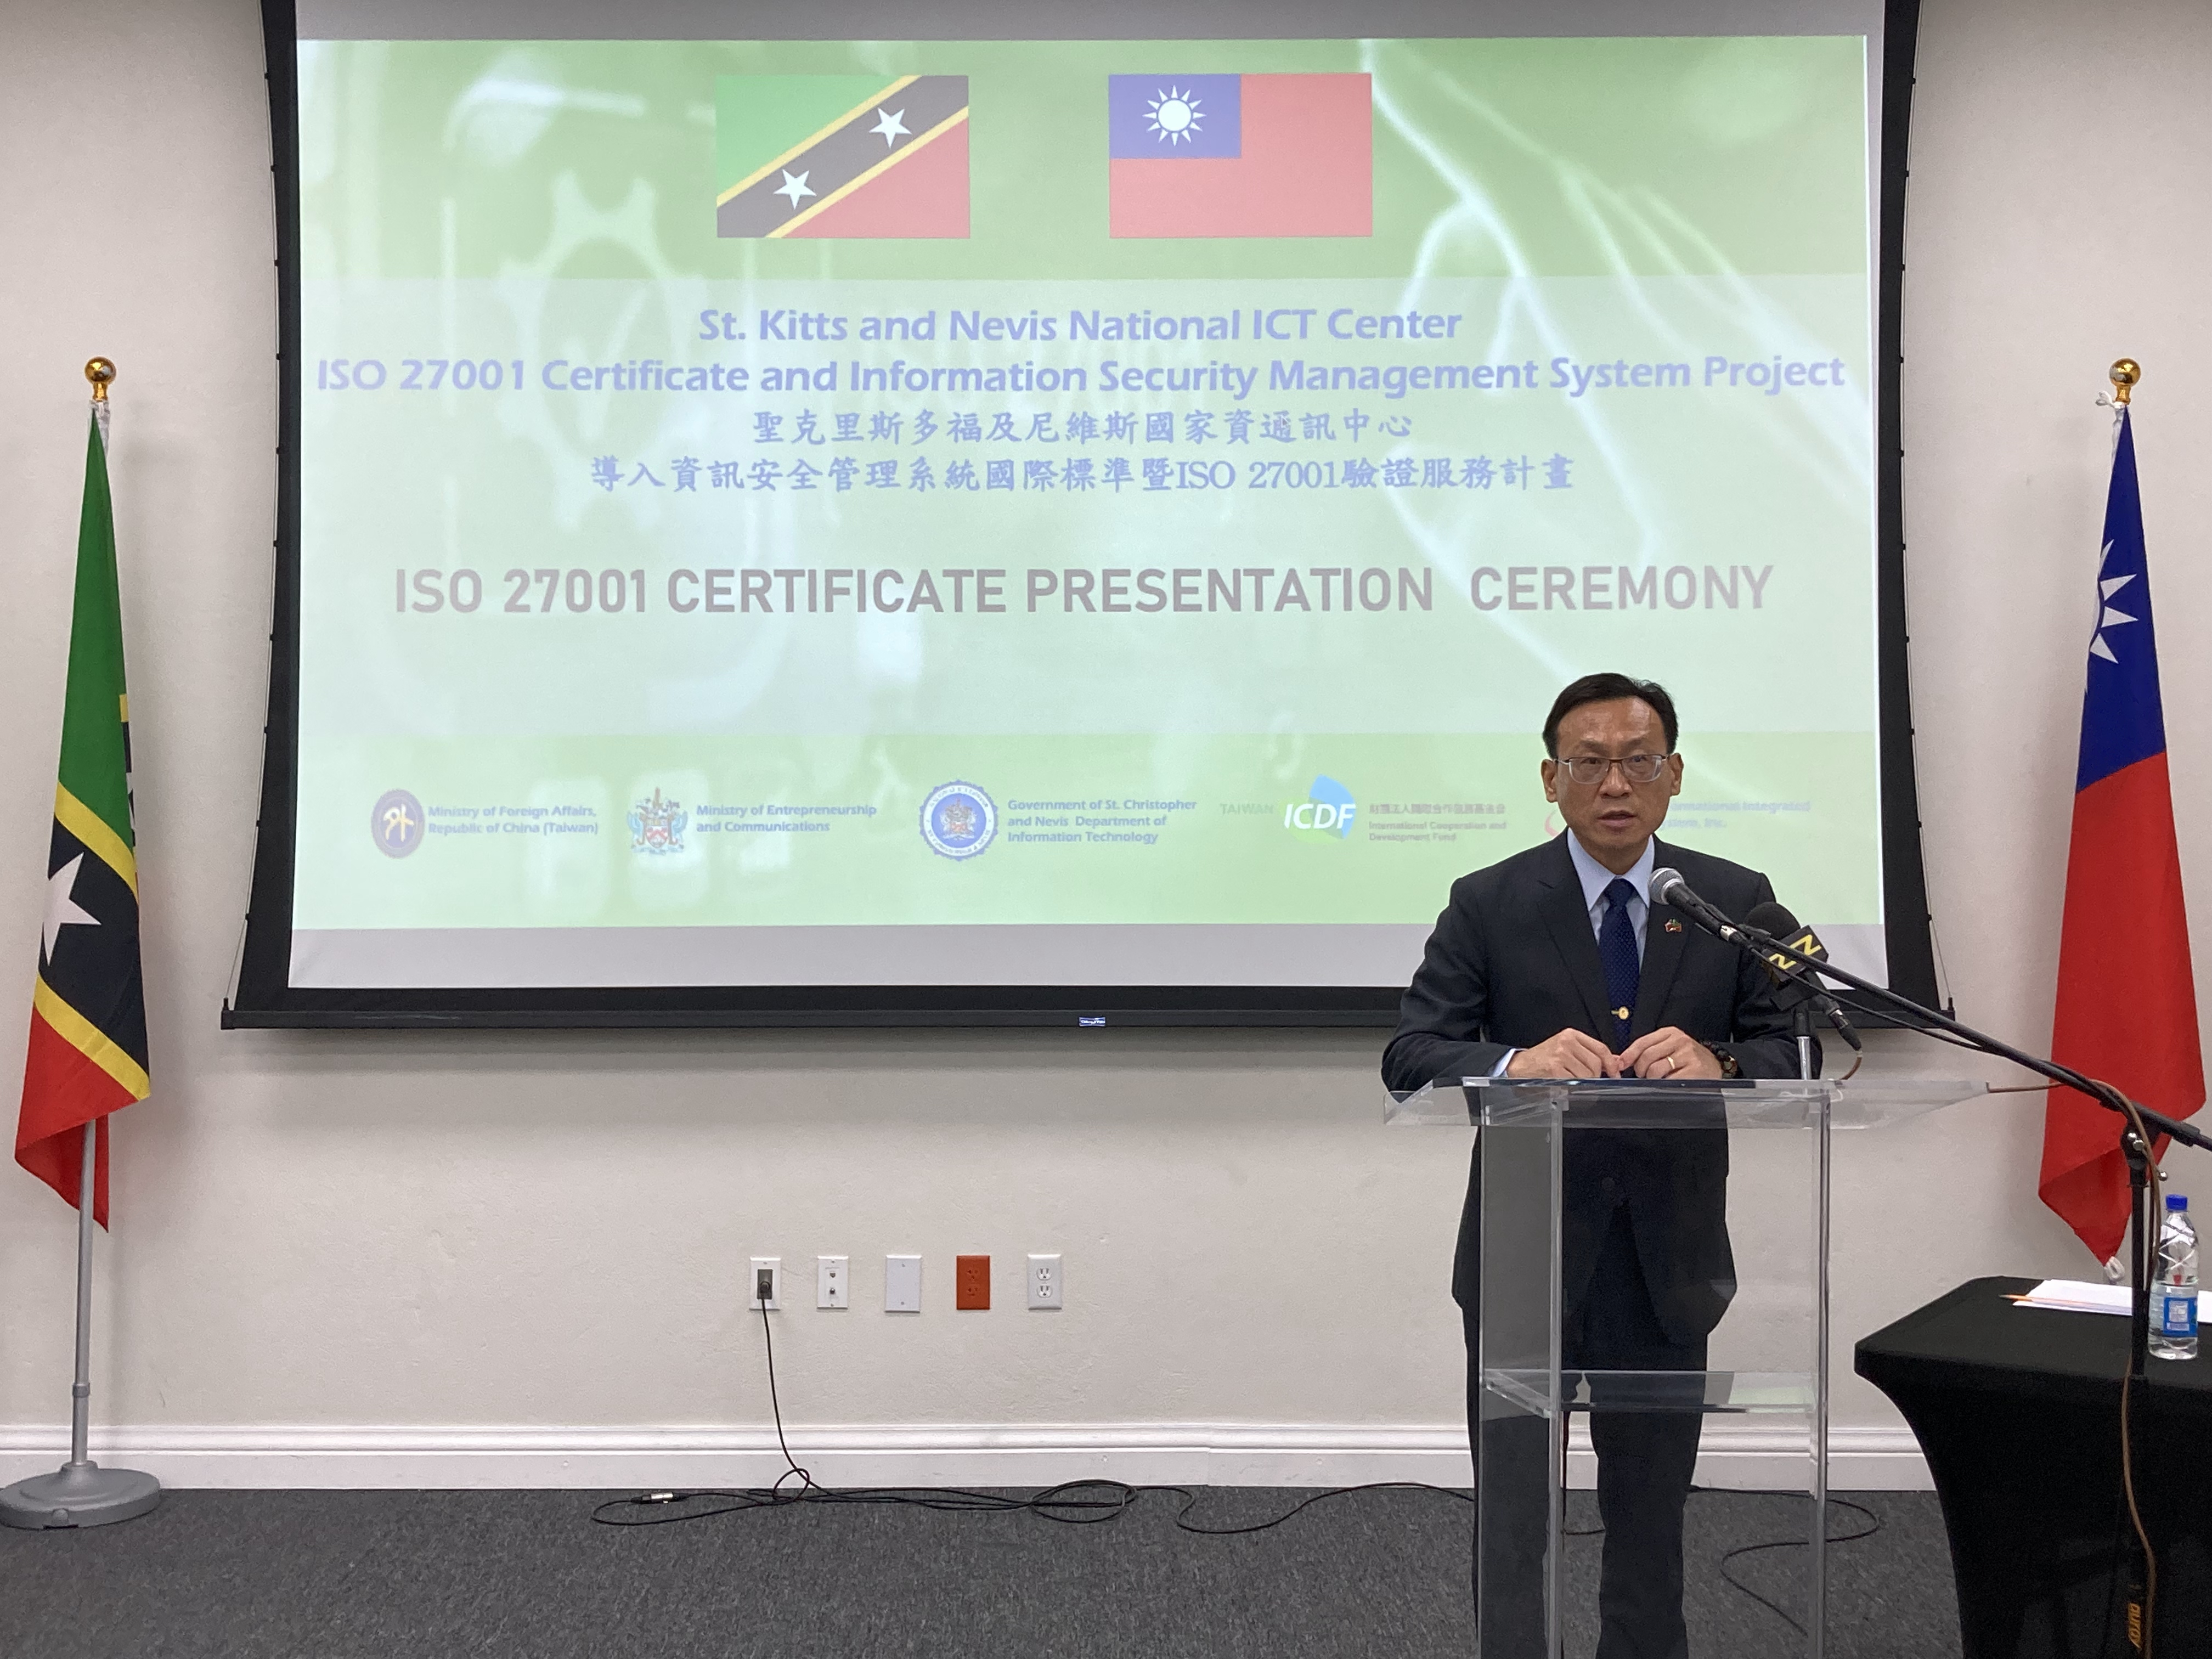 St. Kitts and Nevis National ICT Center receives the first ISO 27001 certificate, leading the country’s digital transformation